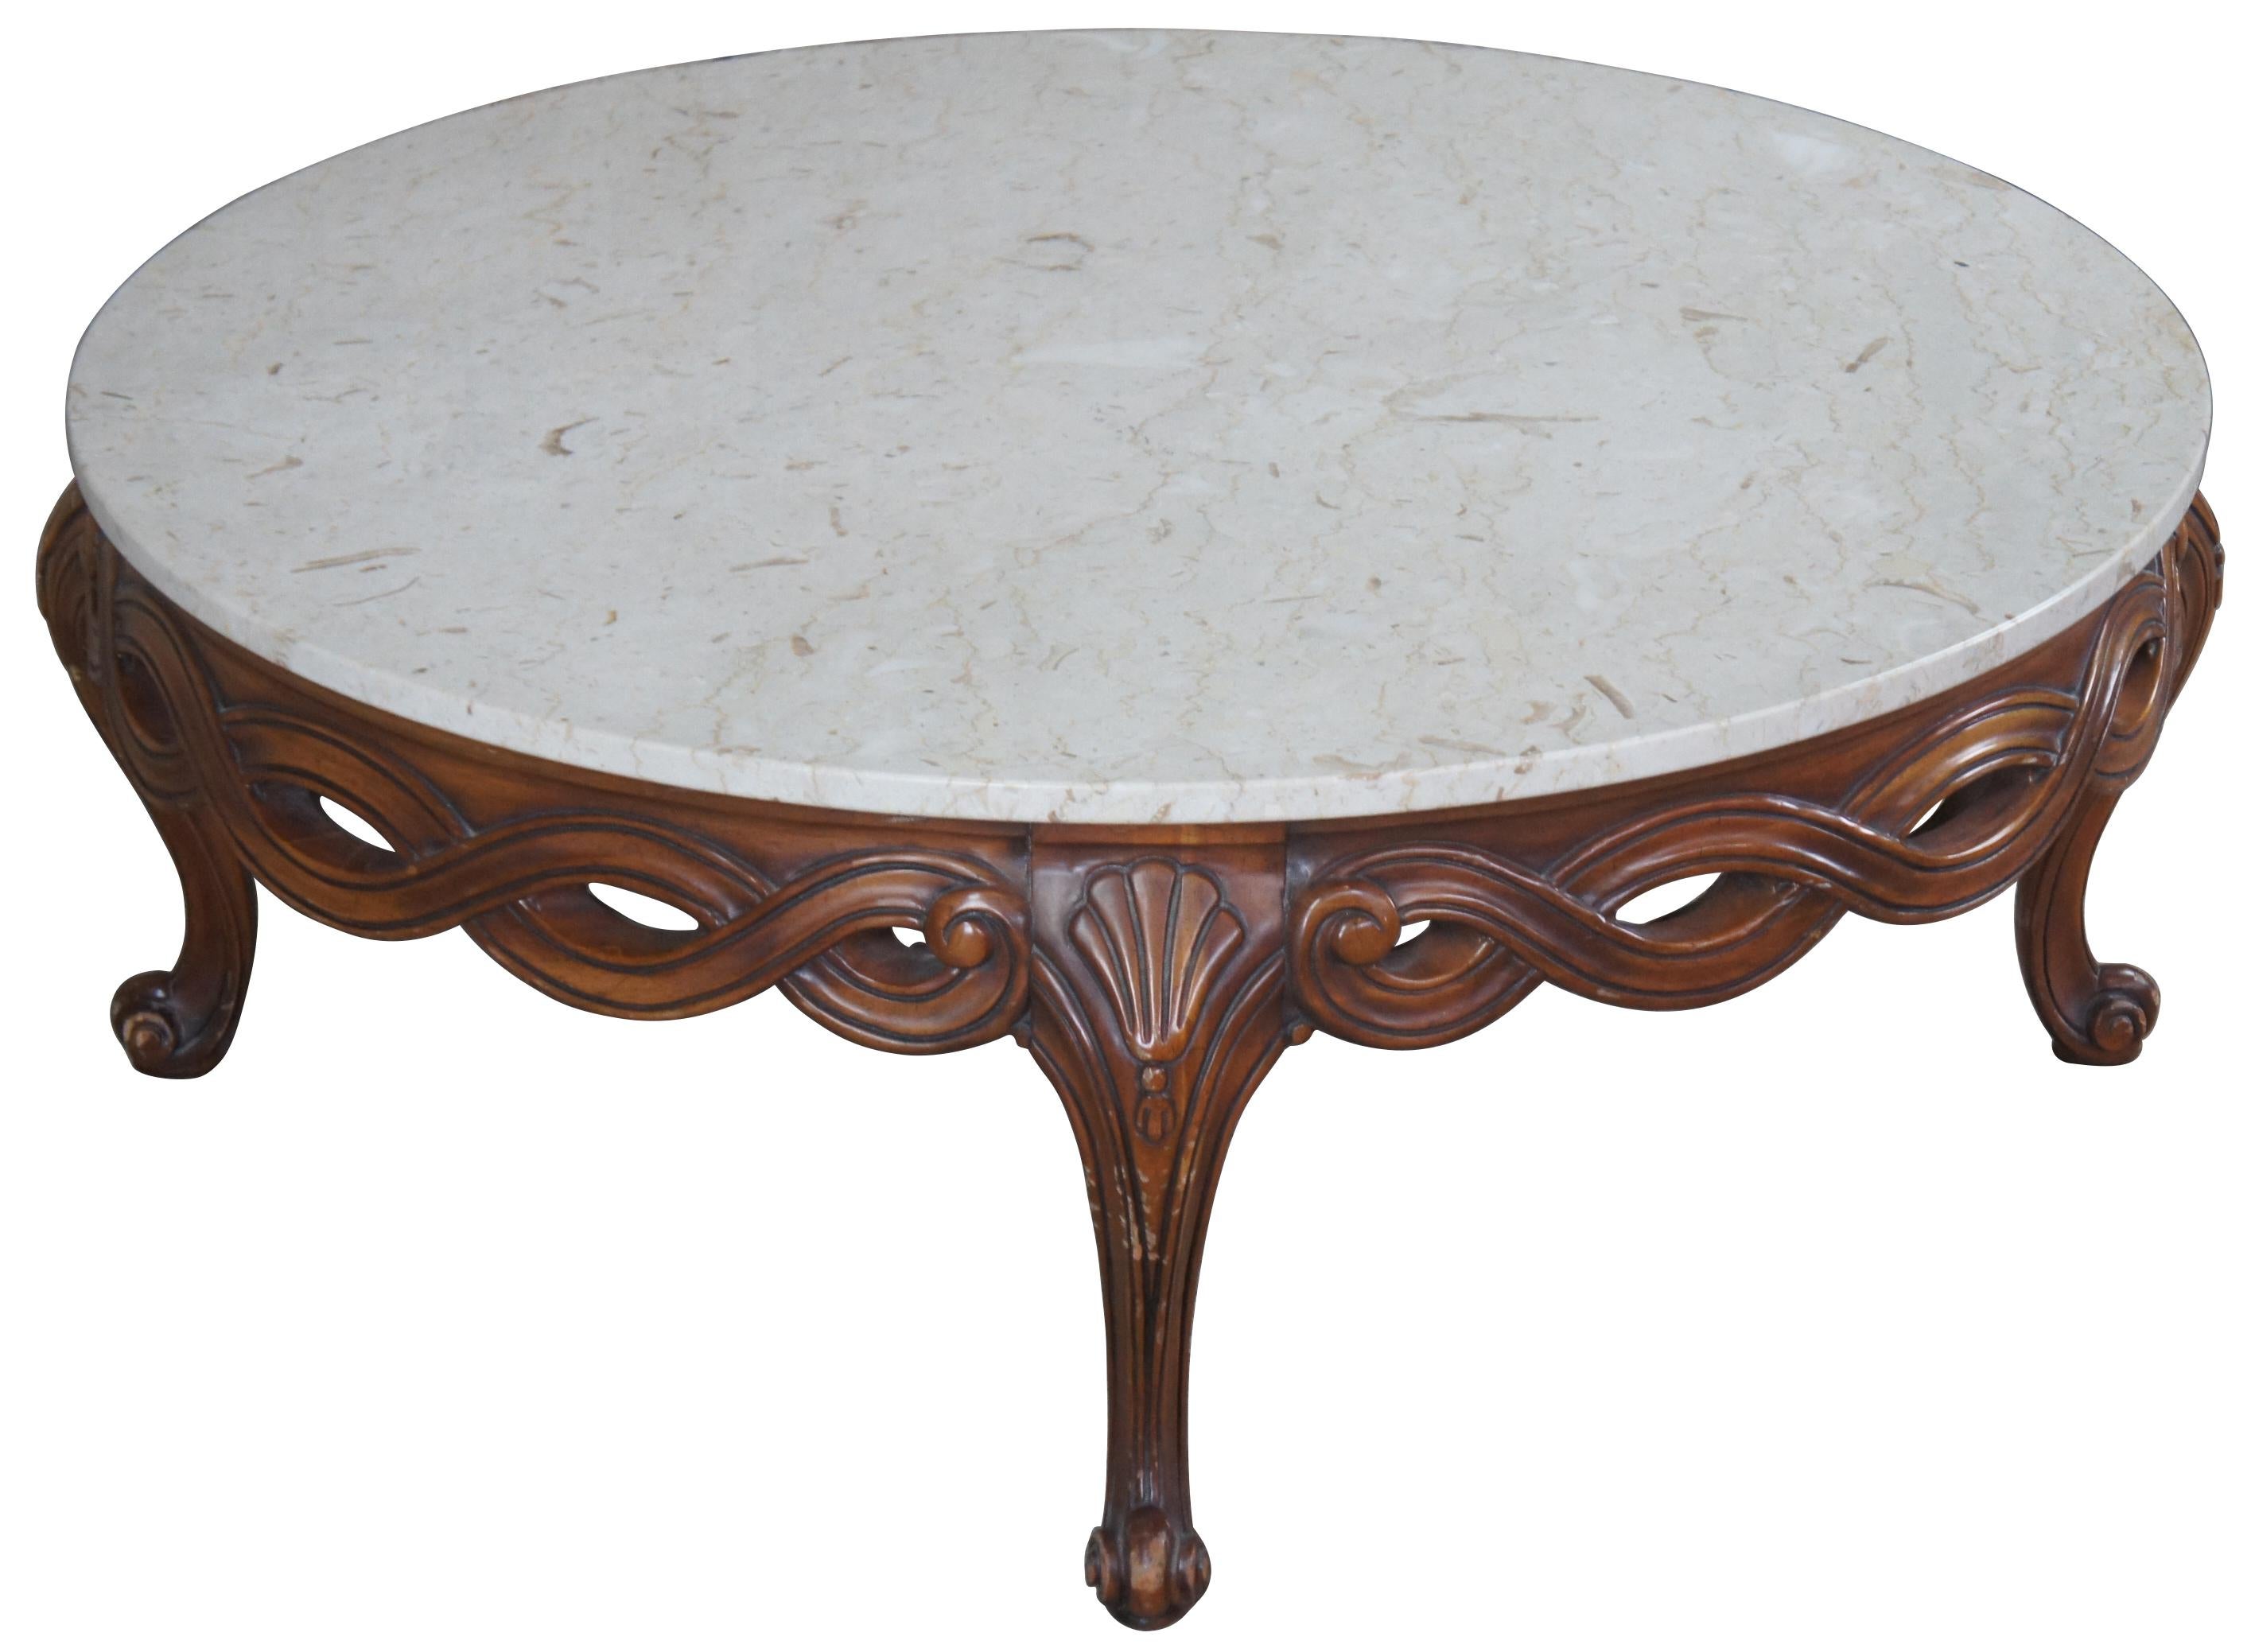 Weiman French Provincial coffee table, circa 1960s. Features a walnut pierced and braided base with cabriole legs leading to scrolled foot. Includes scalloped carvings and an Italian marble top.
 